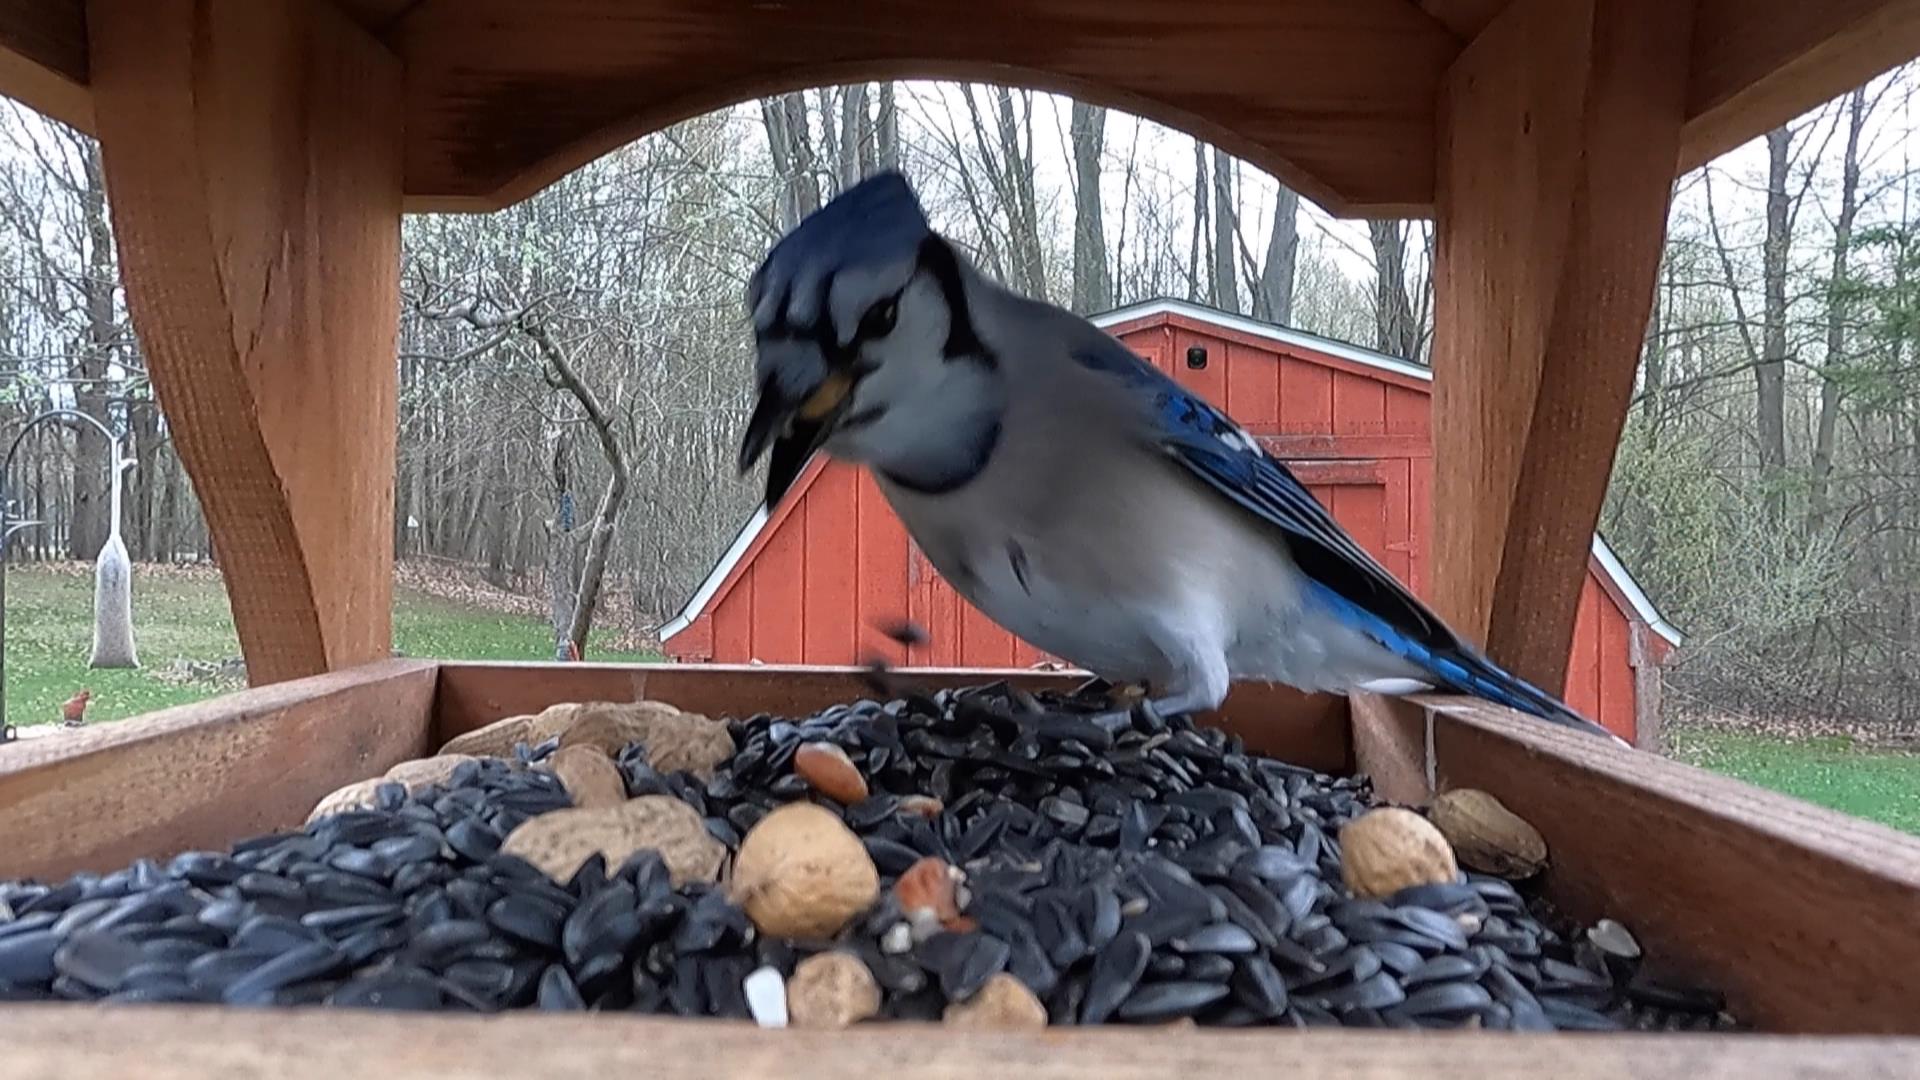 Blue Jays load up on peanuts before the storm